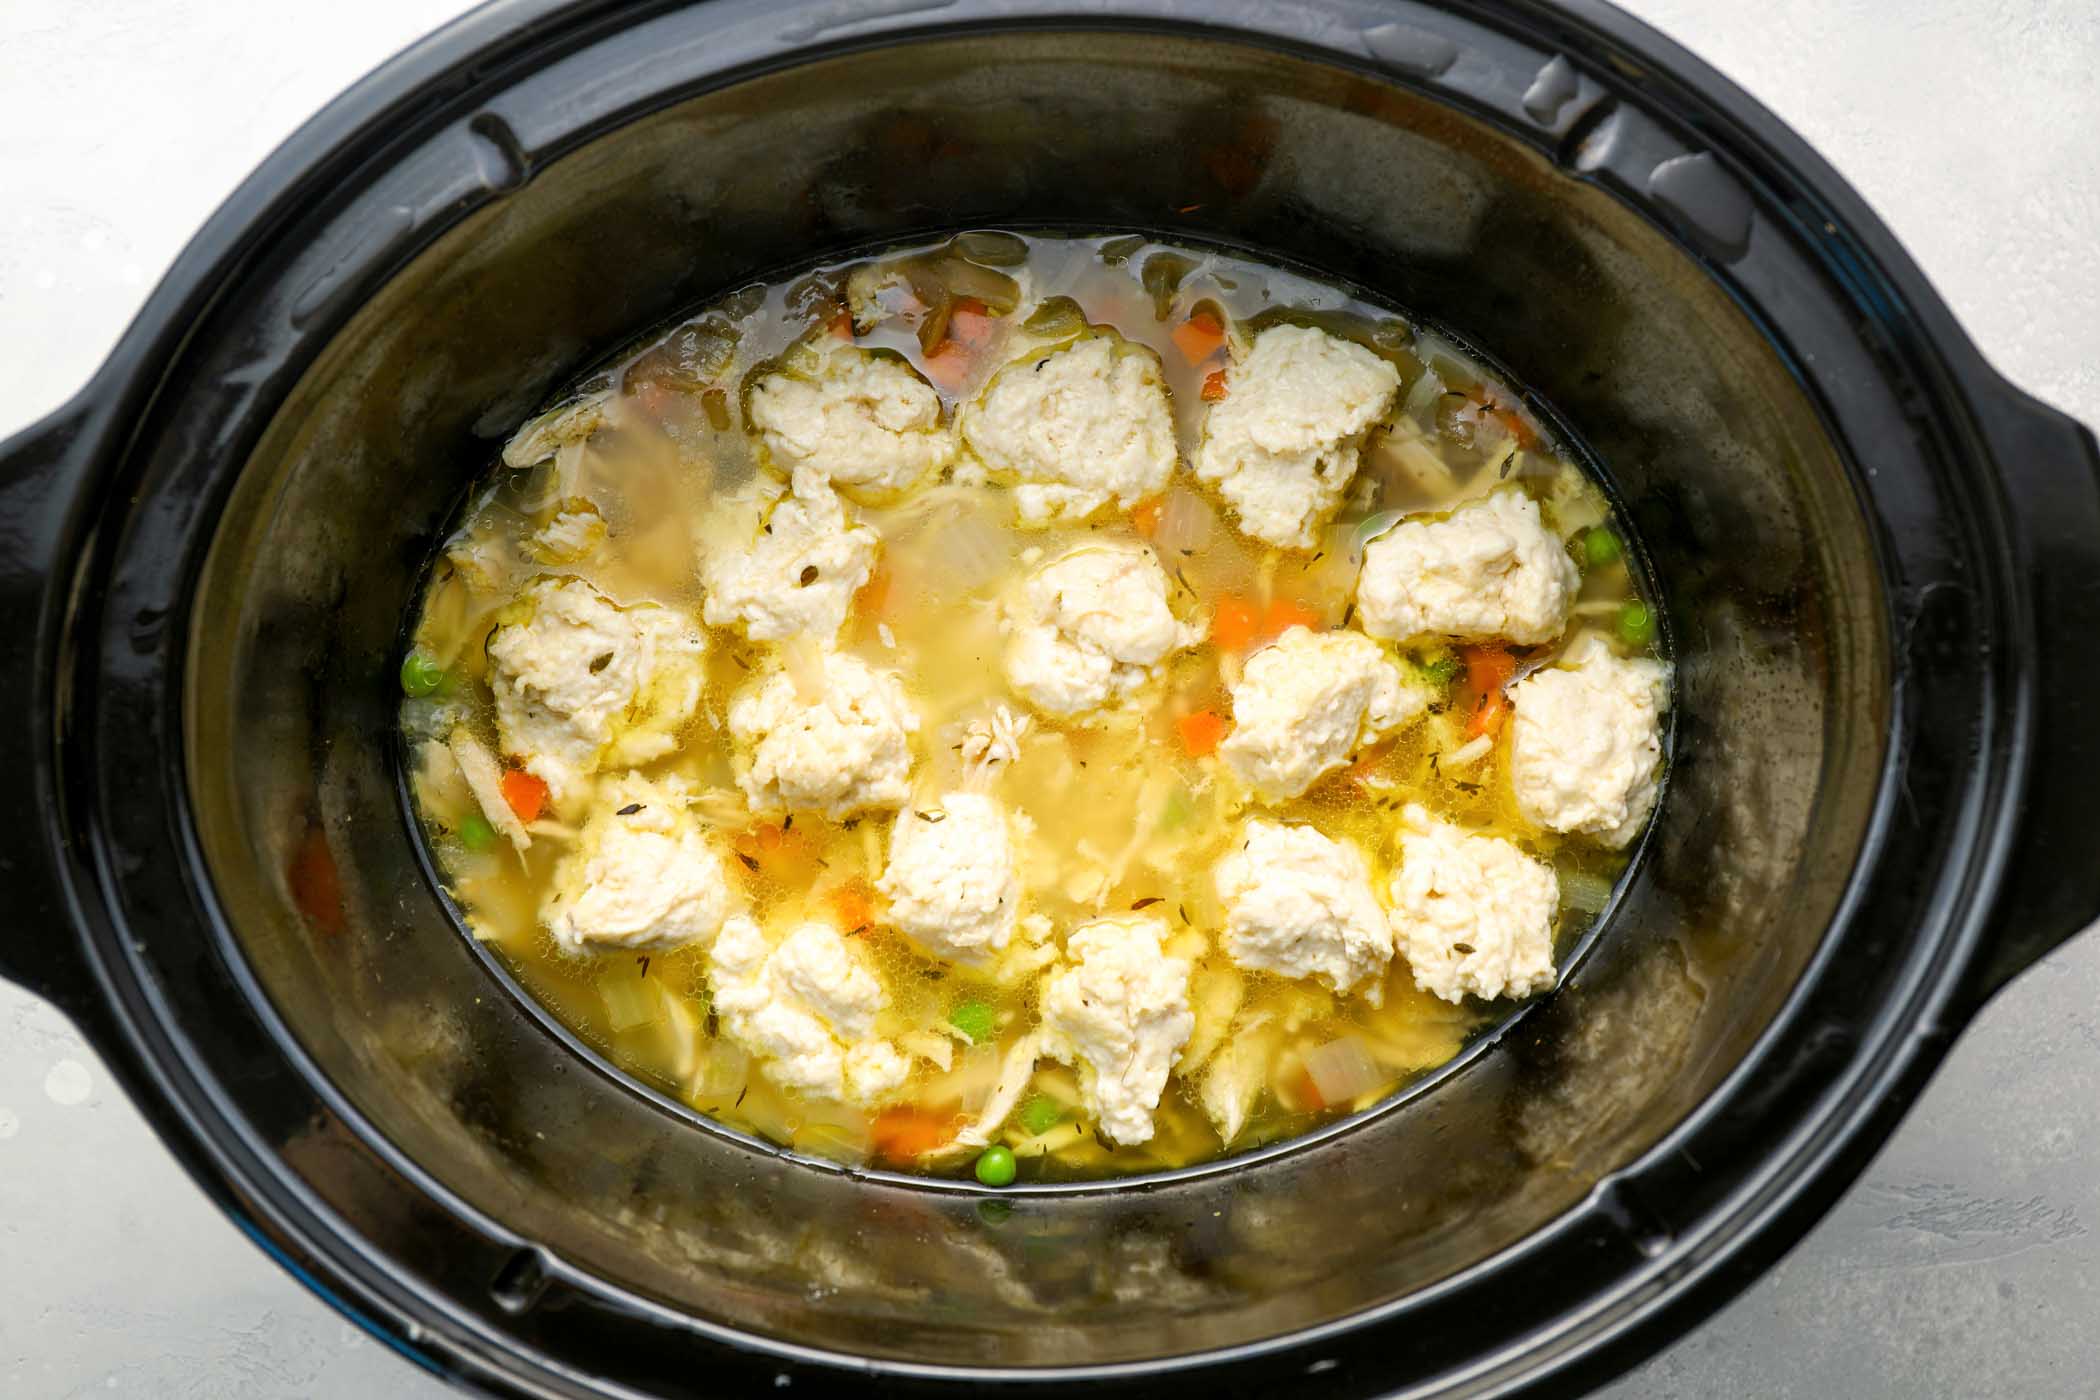 Spoonfuls of dumpling dough added on top of chicken soup in slow cooker.